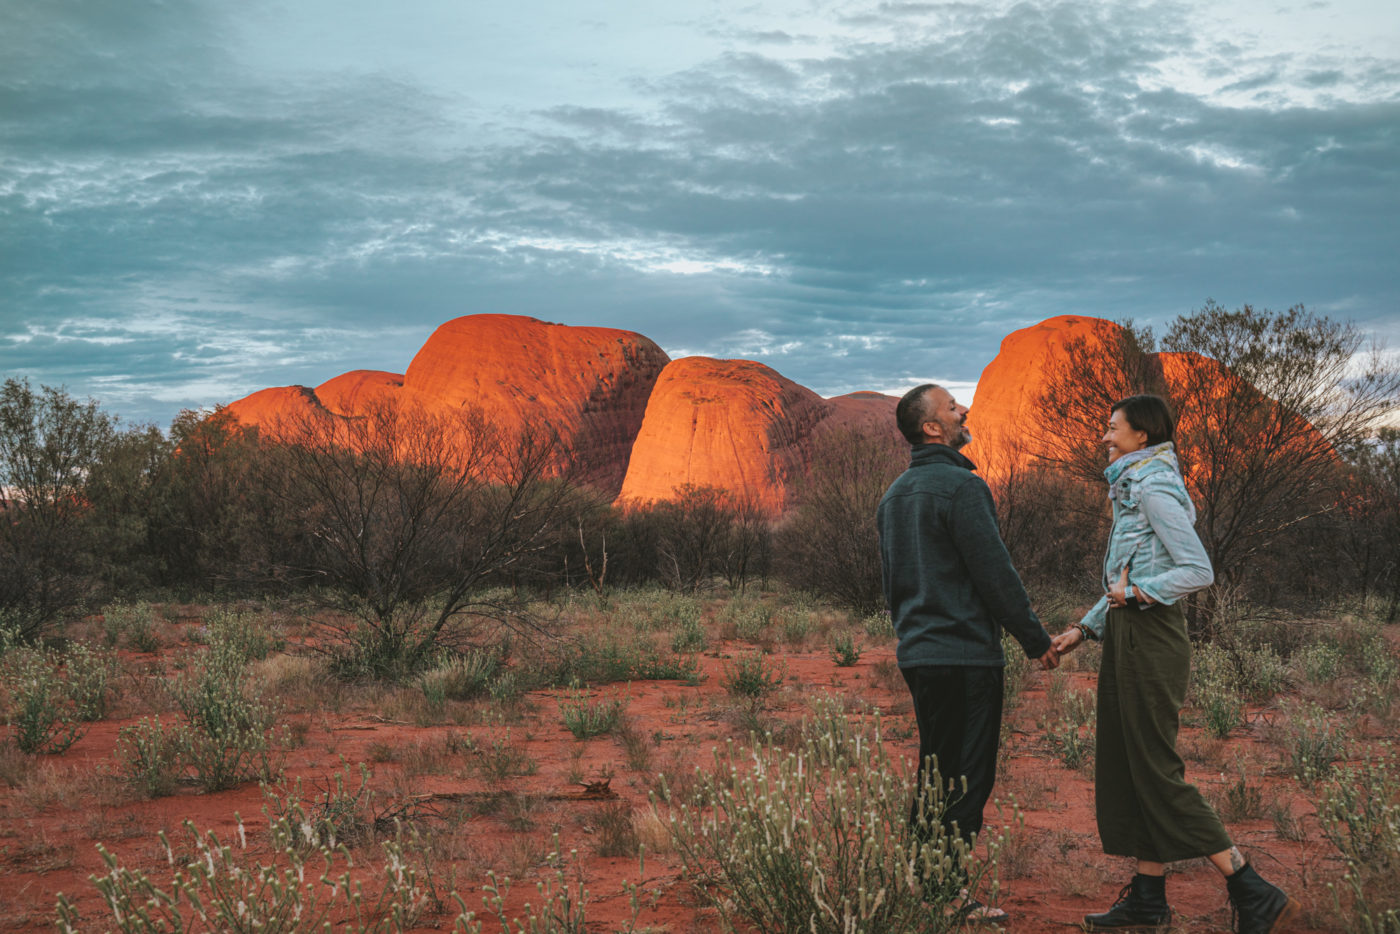 Watch the sunset over Kata Tjuta and admire the view.